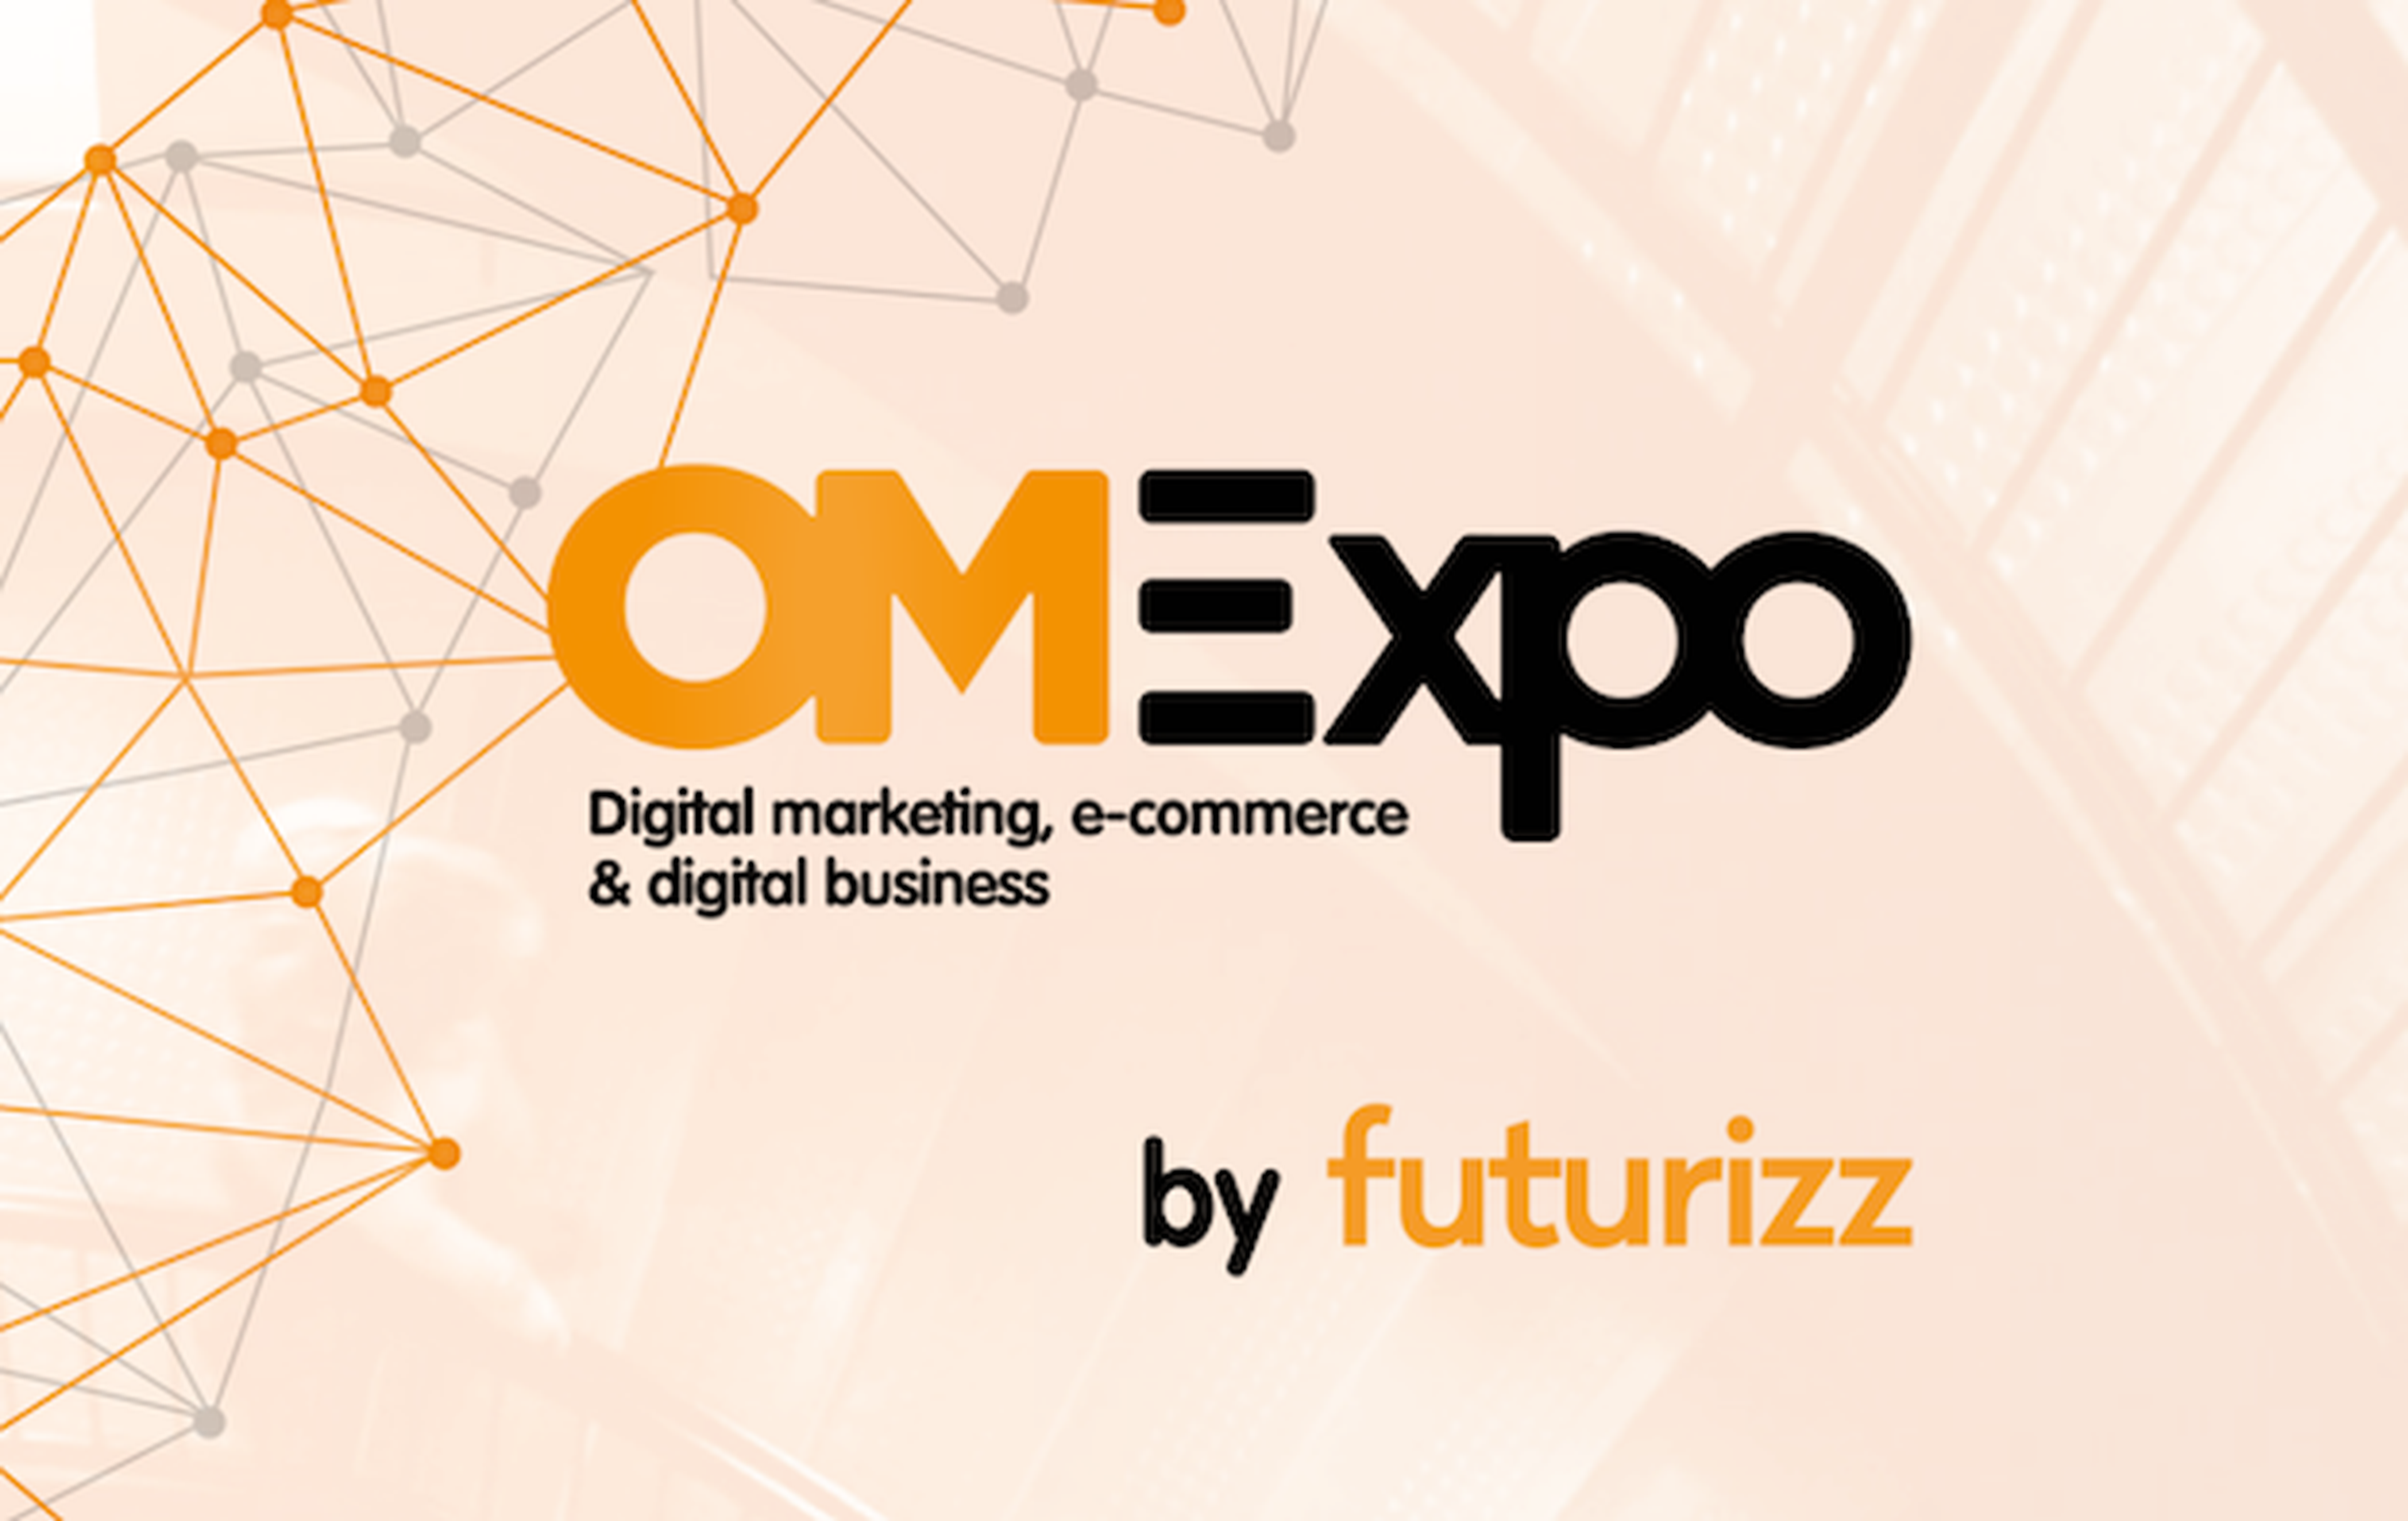 OMExpo by futurizz